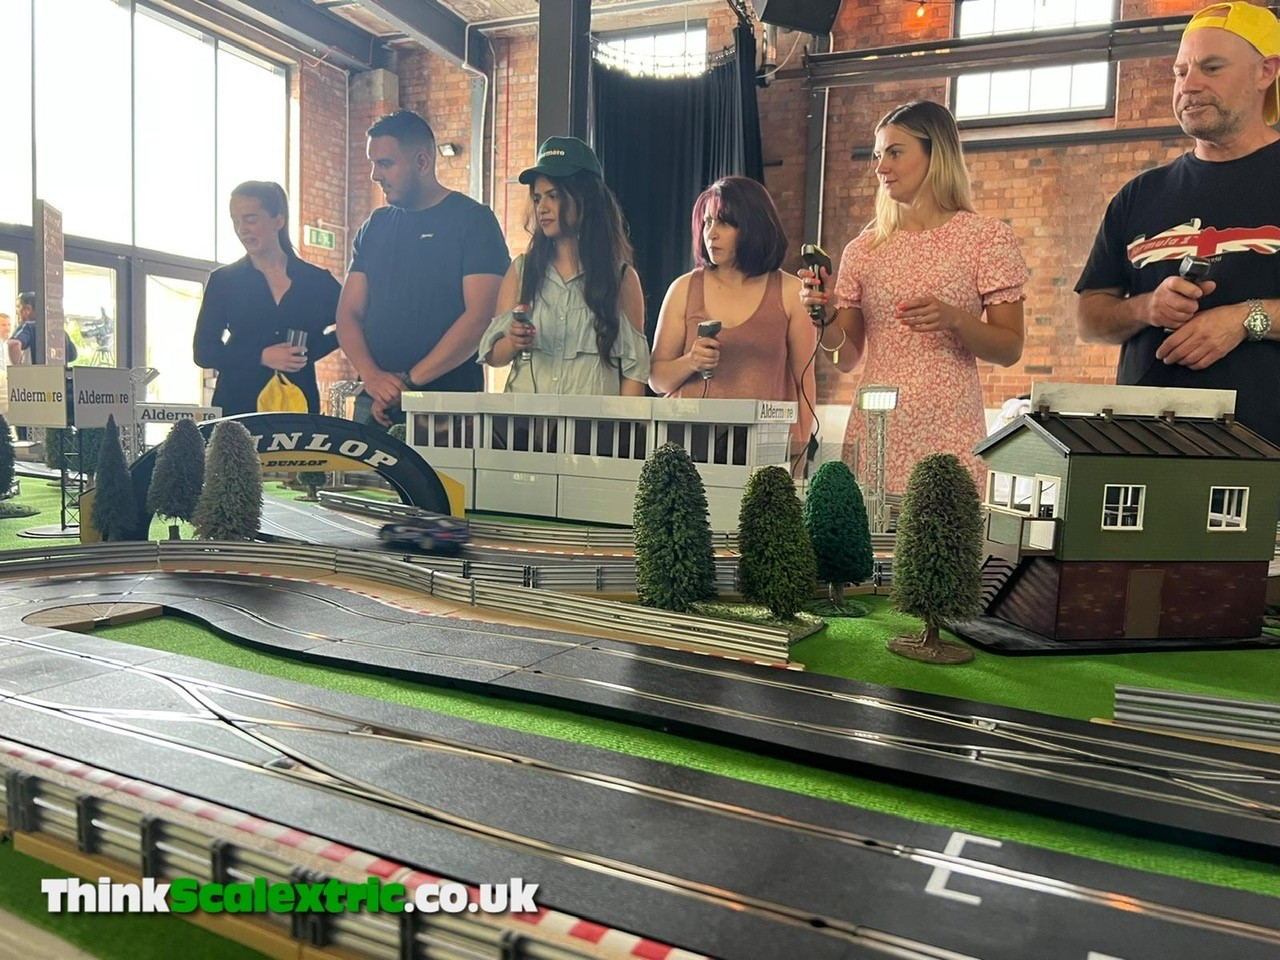 aldermore bank at paintworks events space bristol scalextric hire networking event